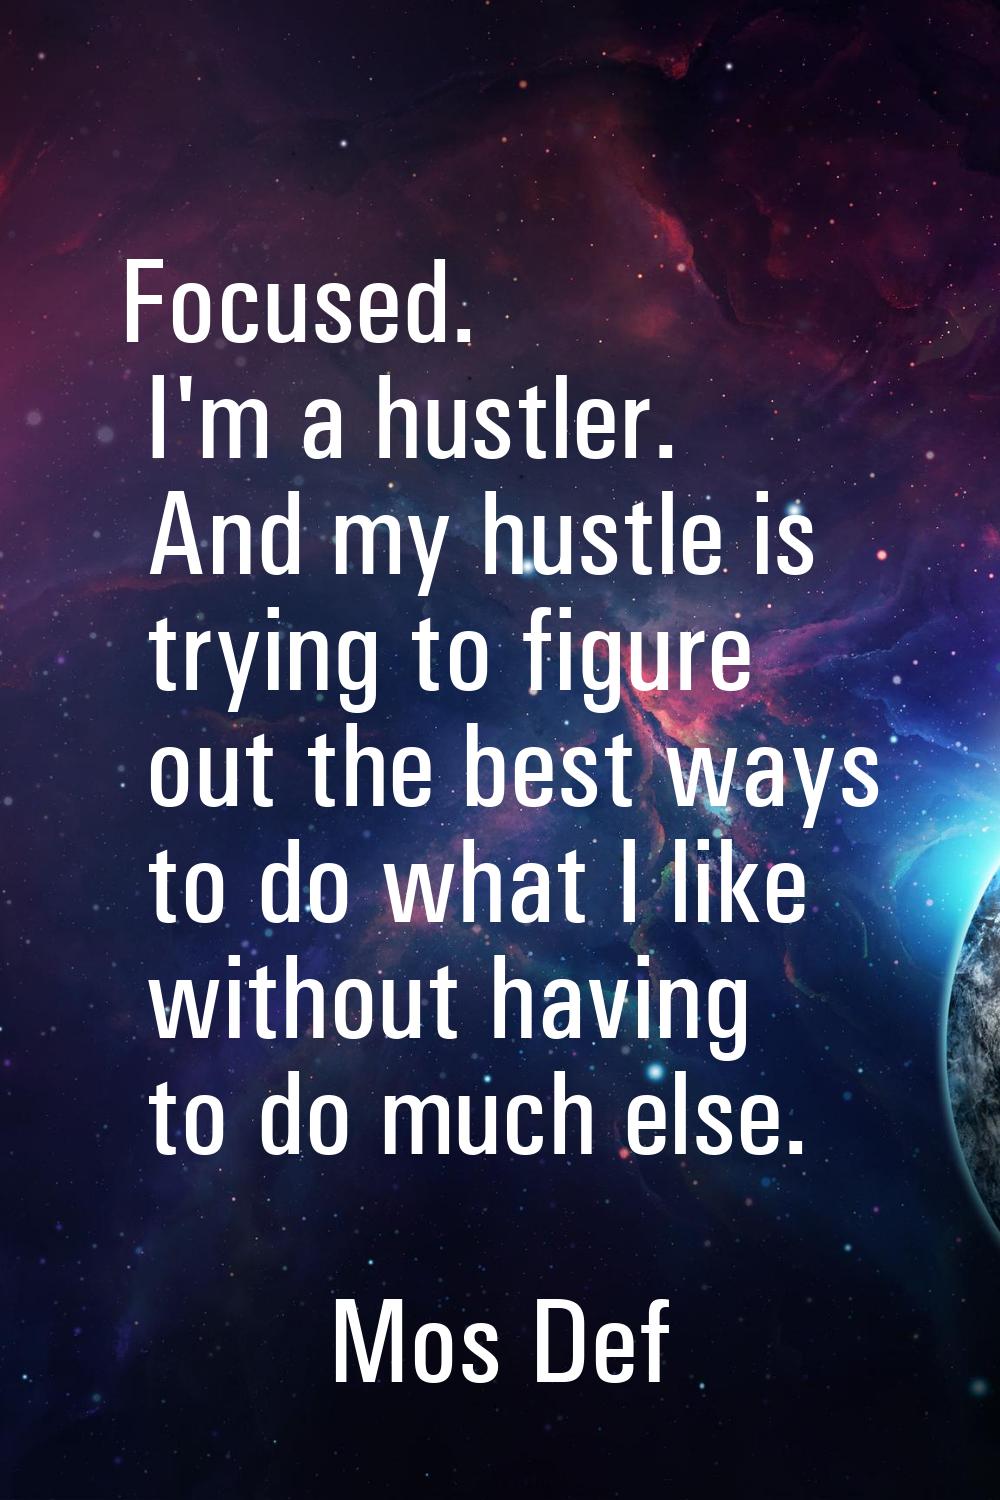 Focused. I'm a hustler. And my hustle is trying to figure out the best ways to do what I like witho